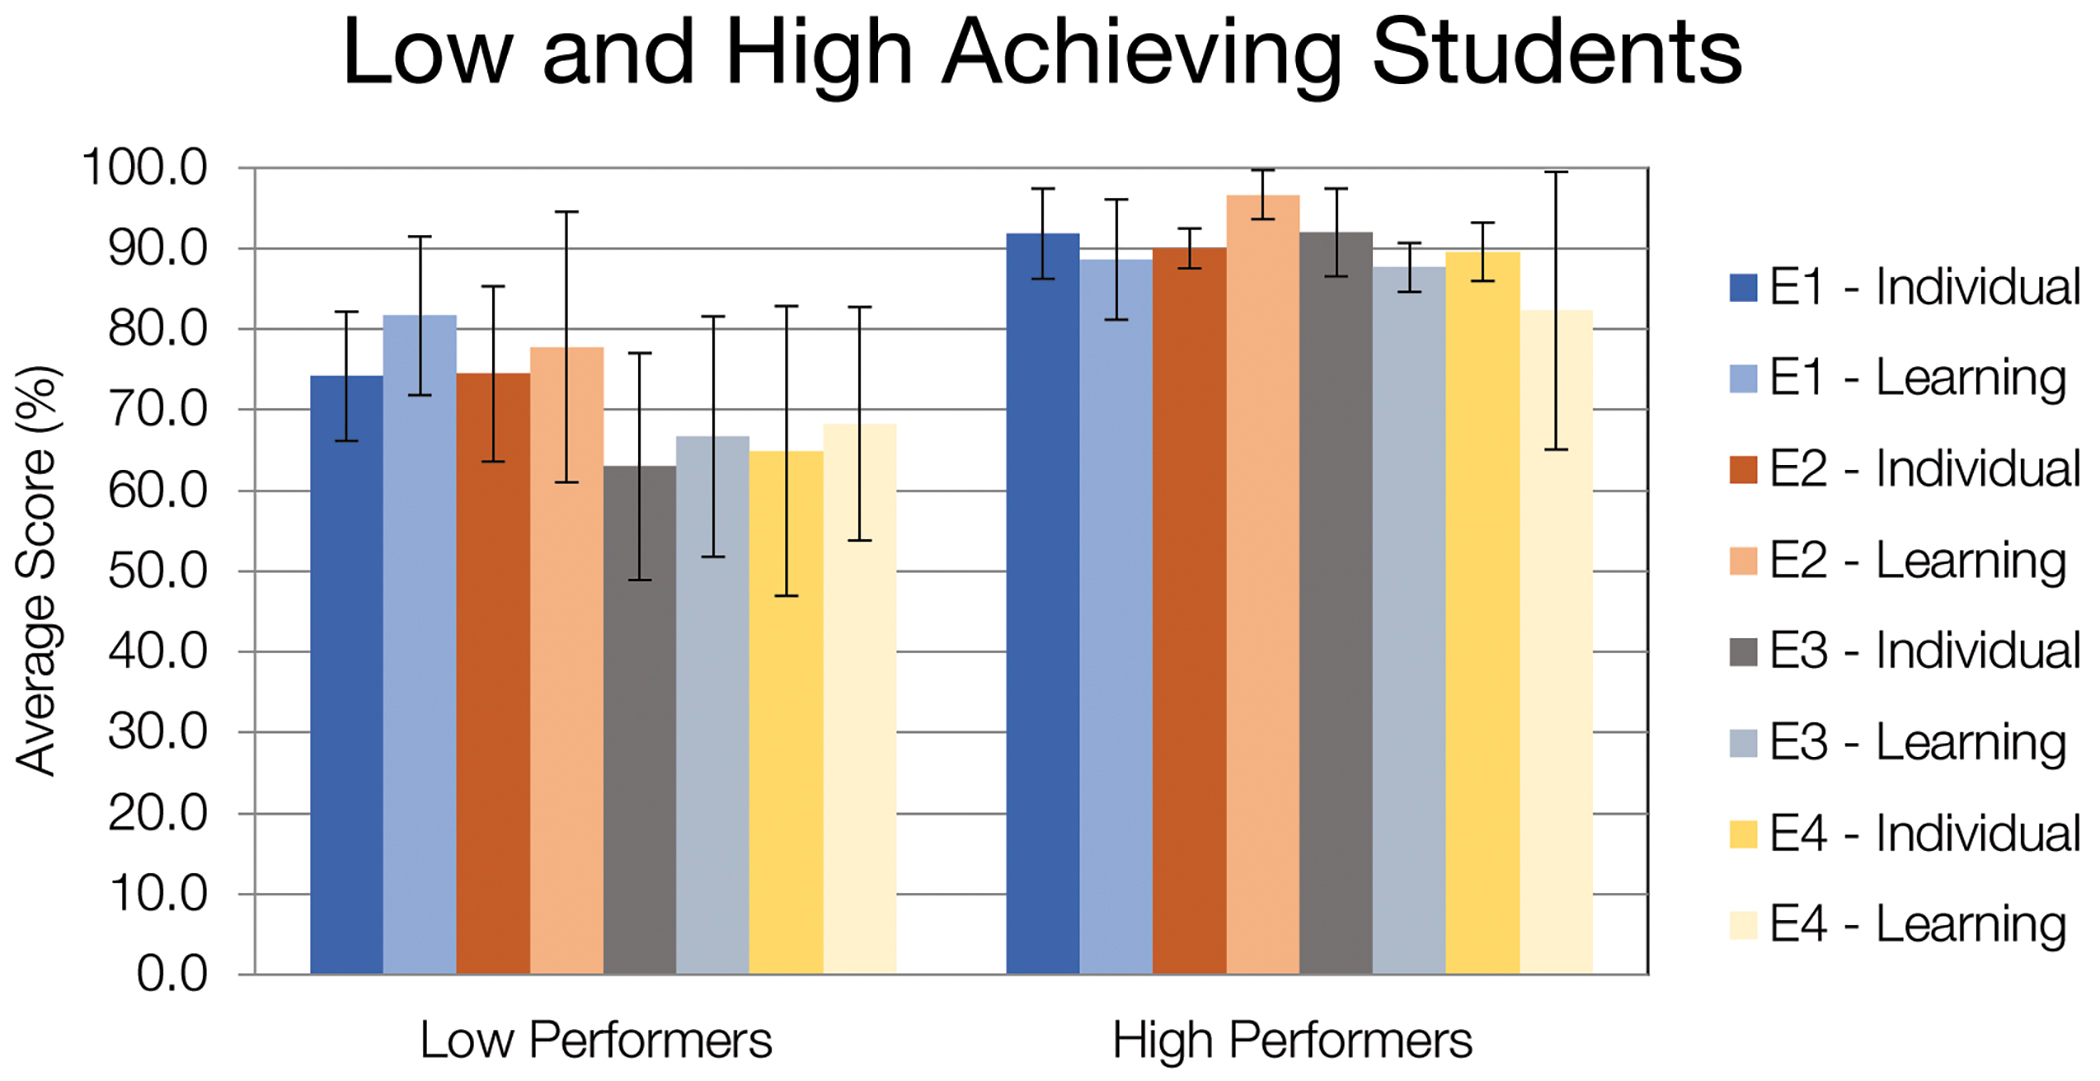 Low and high achievers results. 